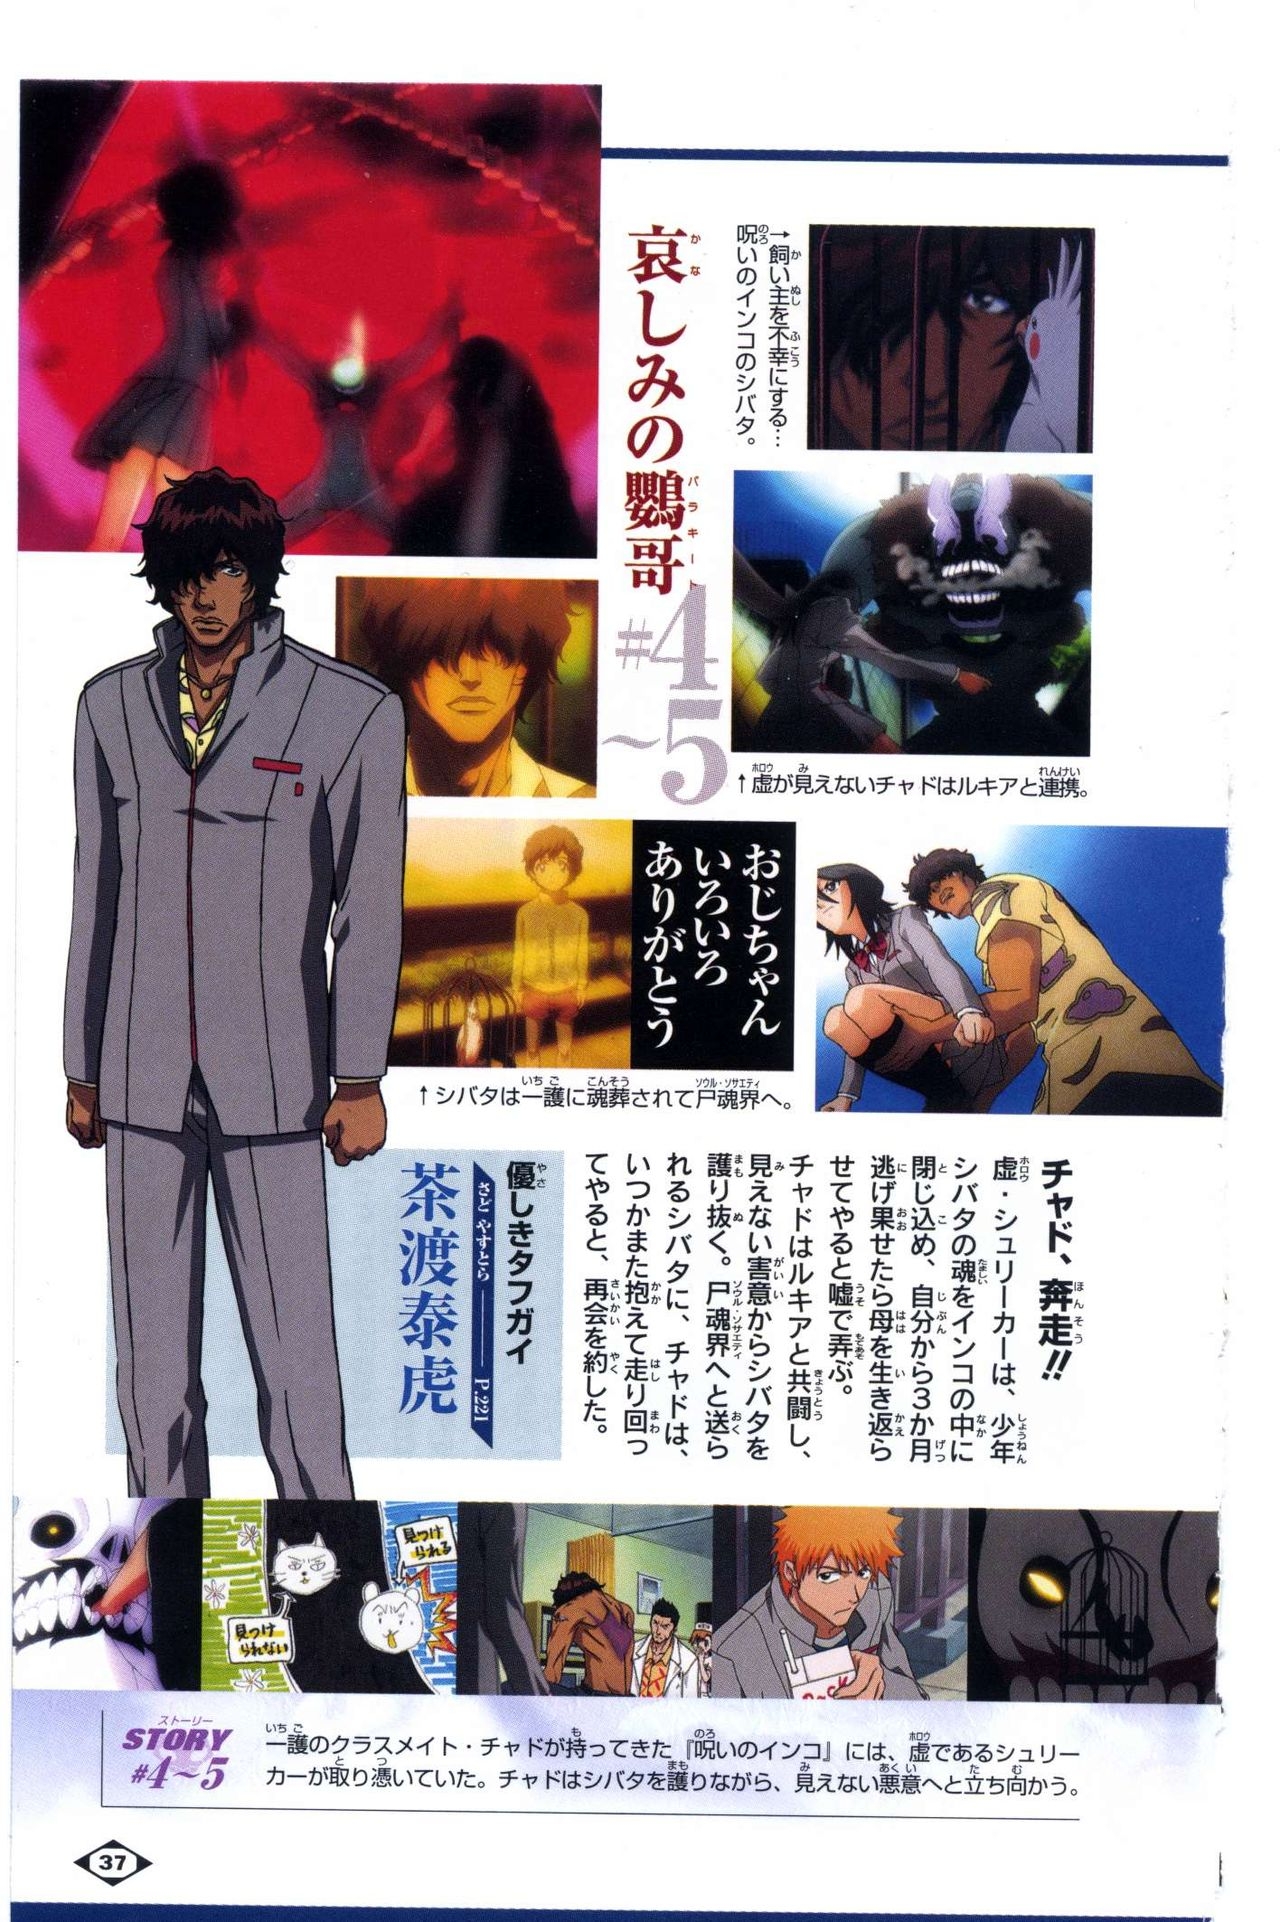 Bleach: Official Animation Book VIBEs 37